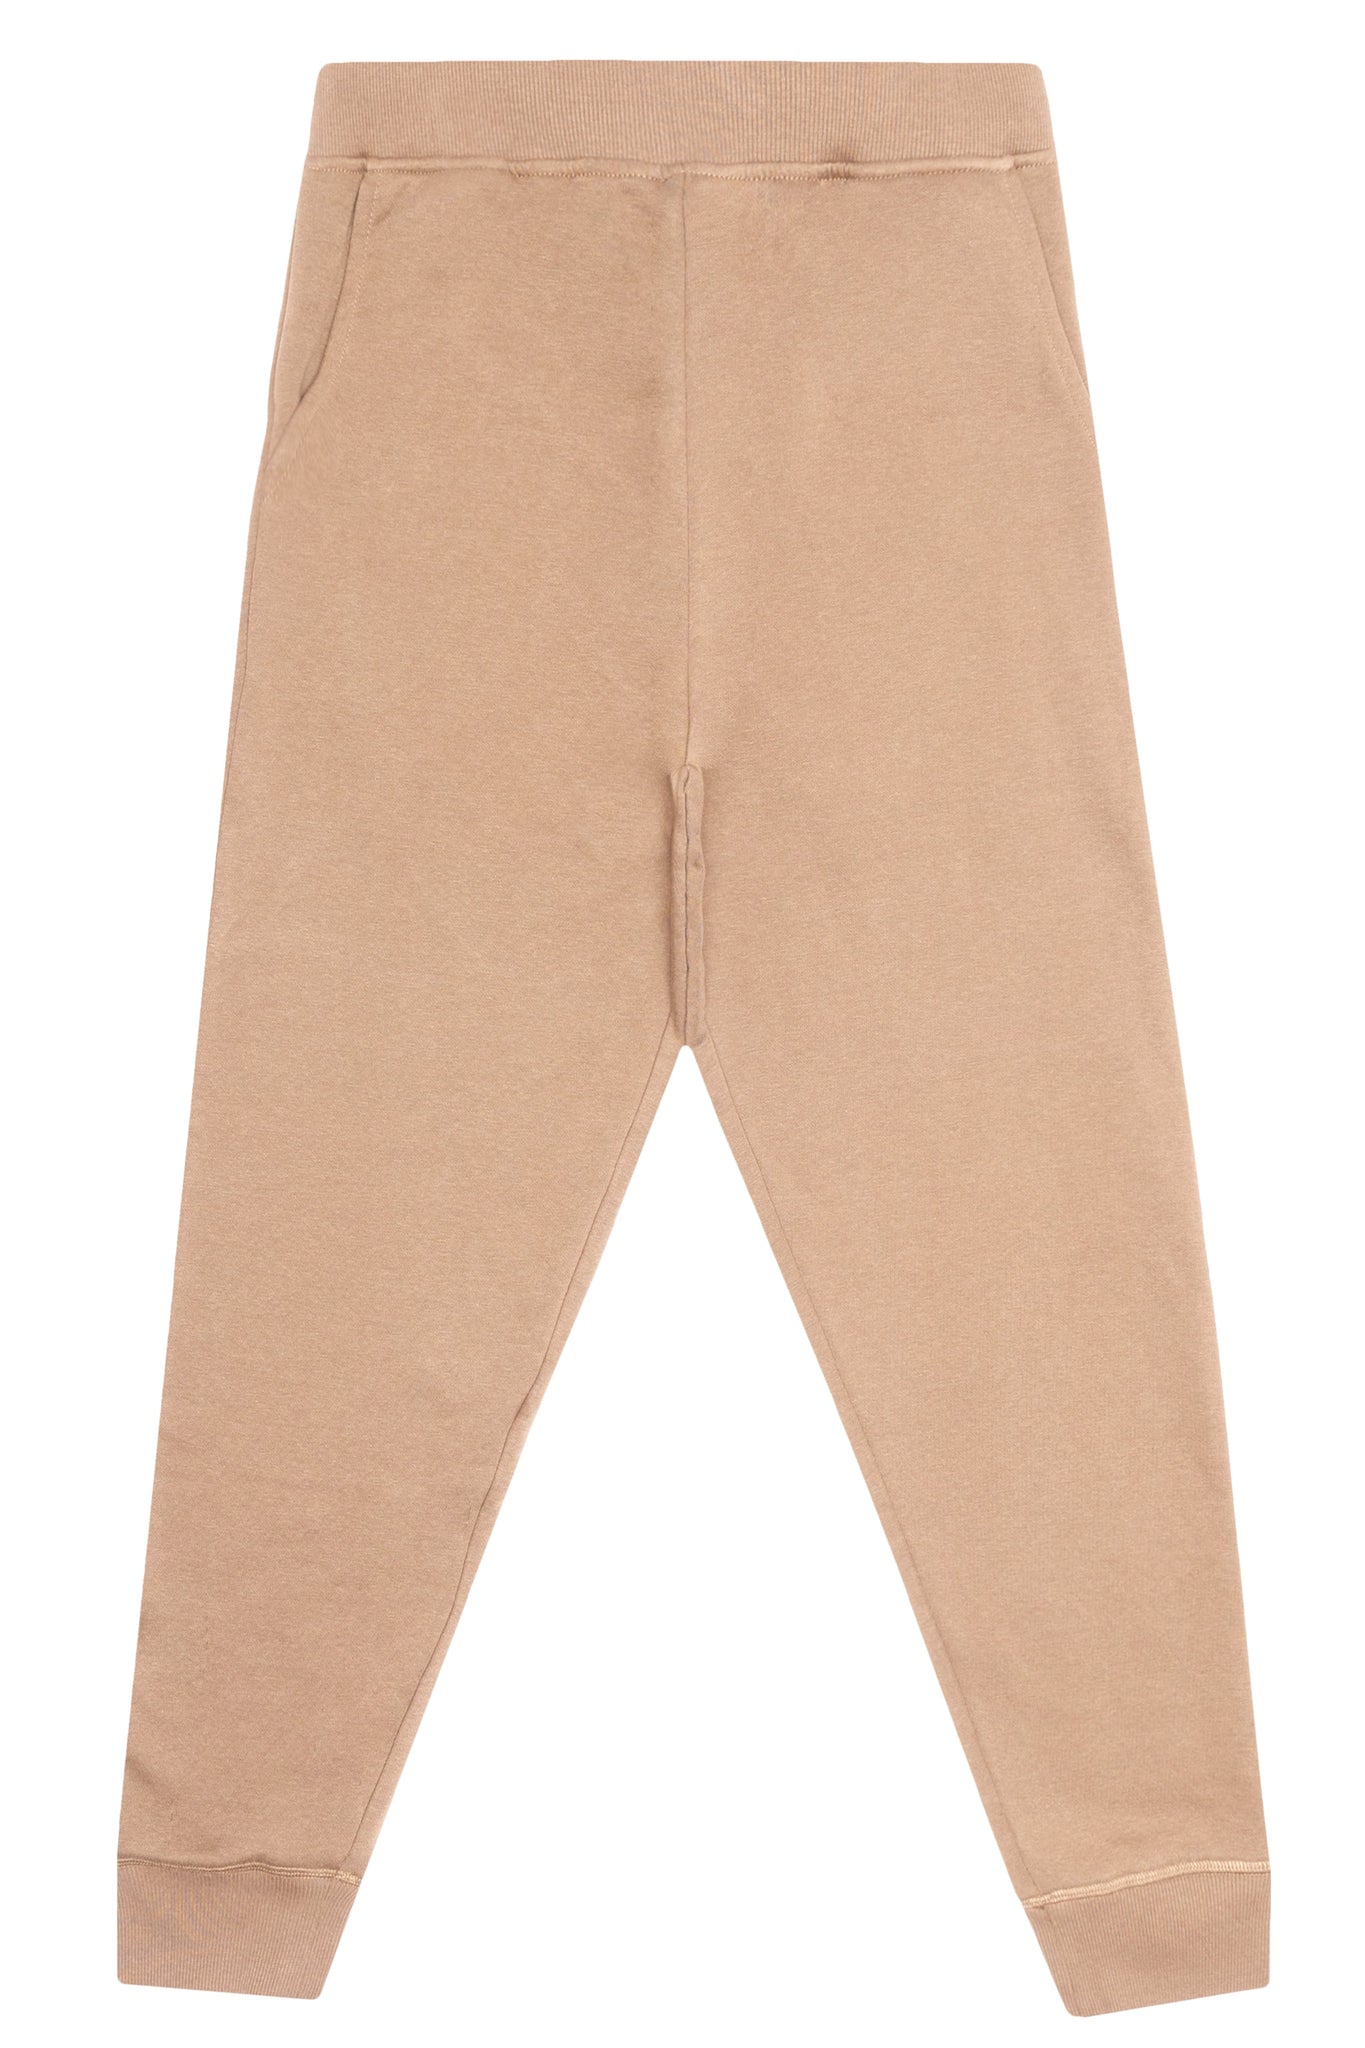 HERO - 5020R Unisex Joggers - Clay (Relaxed Fit)